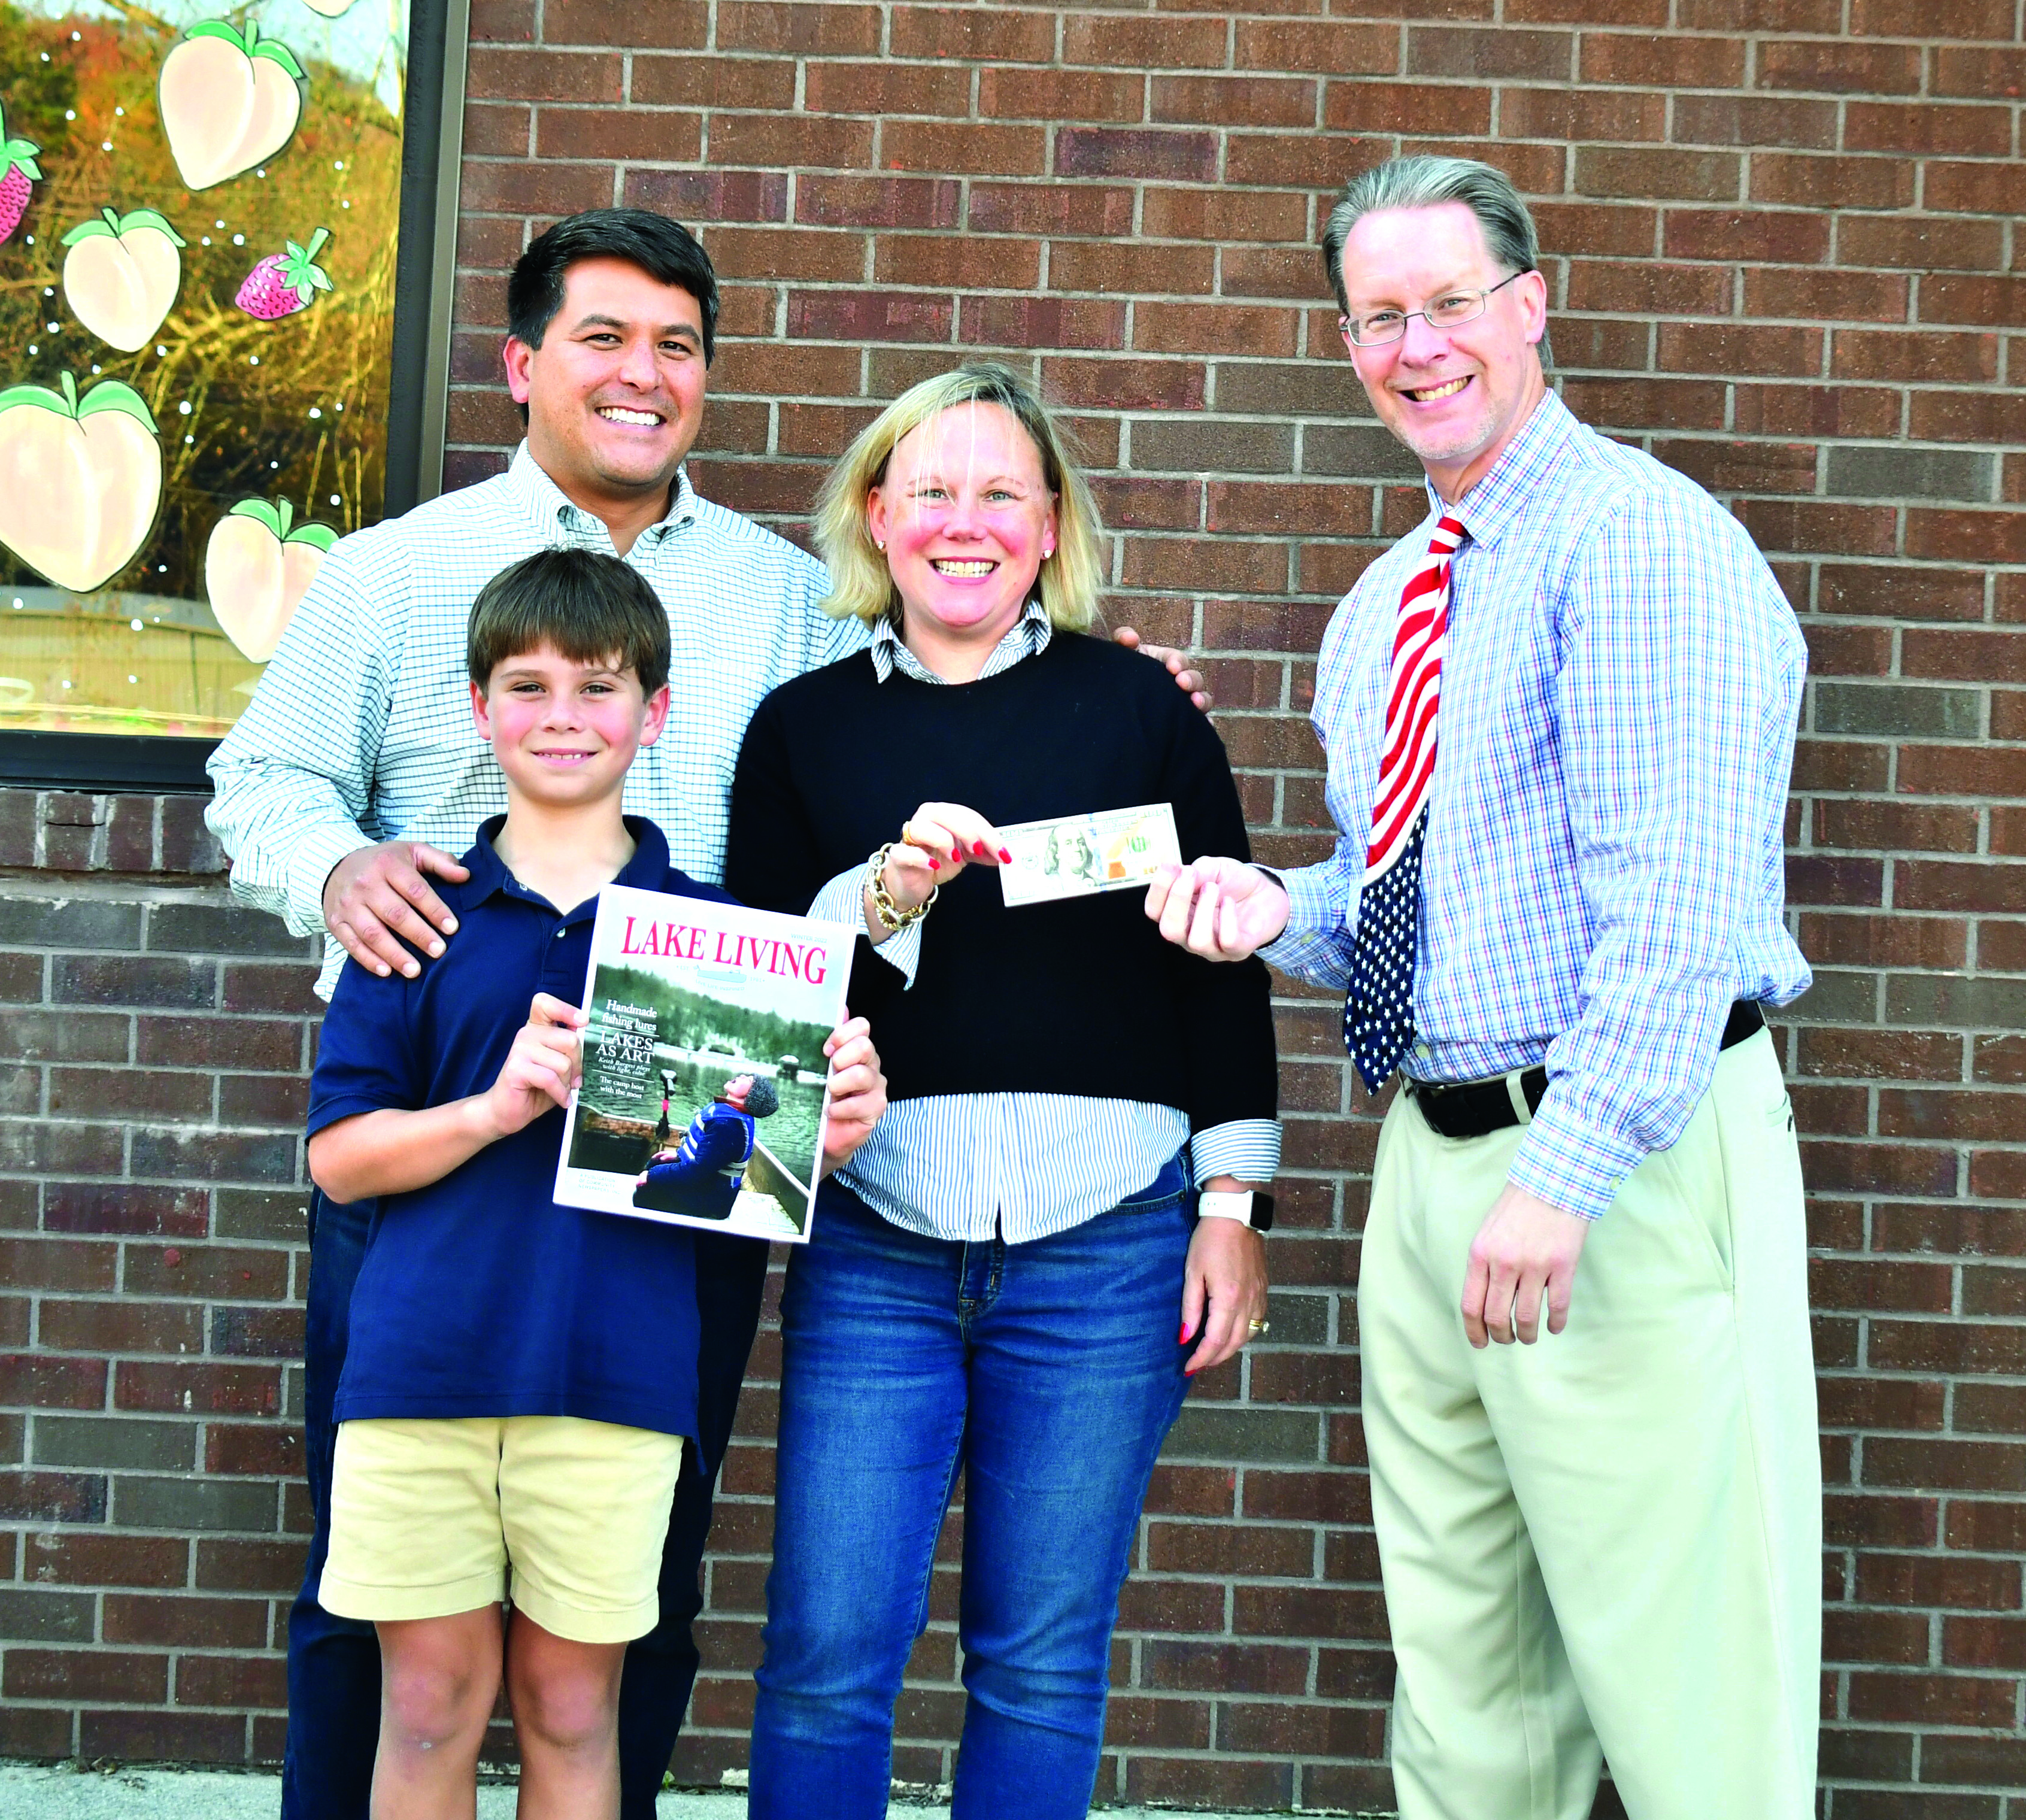 Megan Broome/The Clayton Tribune. Jonathon, Sarah, and Jonathon Barge Jr., who goes by “J,”  are all smiles as they learn that Jonathon Barge won the Winter 2022 Lake Living cover contest for the picture of “J” in the family’s 1972 Alumacraft fishing boat “catching snowflakes instead of fish” on Lake Burton in January 2022. Enoch Autry, publisher of The Clayton Tribune, hands the family the $100 prize for winning the contest. 